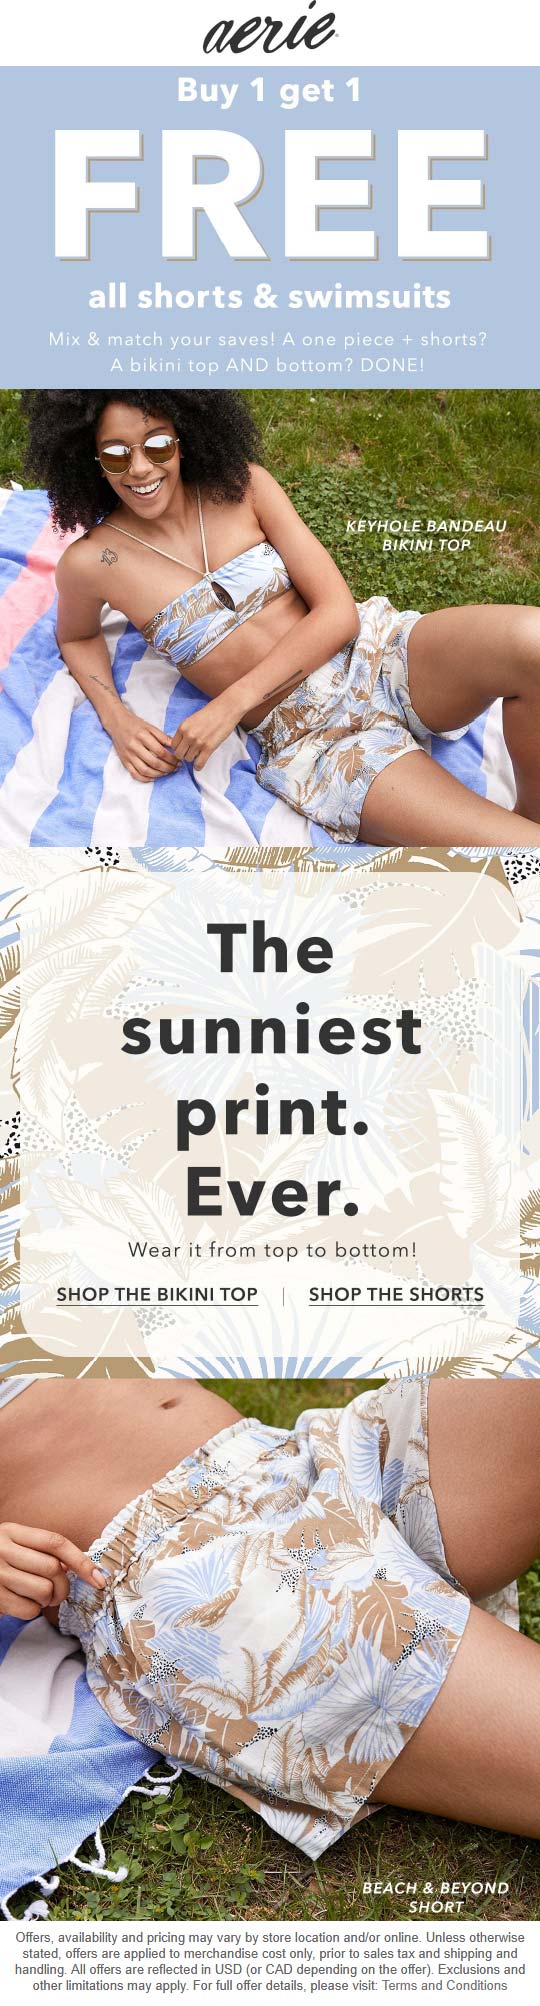 Aerie stores Coupon  Second shorts & swimsuits free today at Aerie, ditto online #aerie